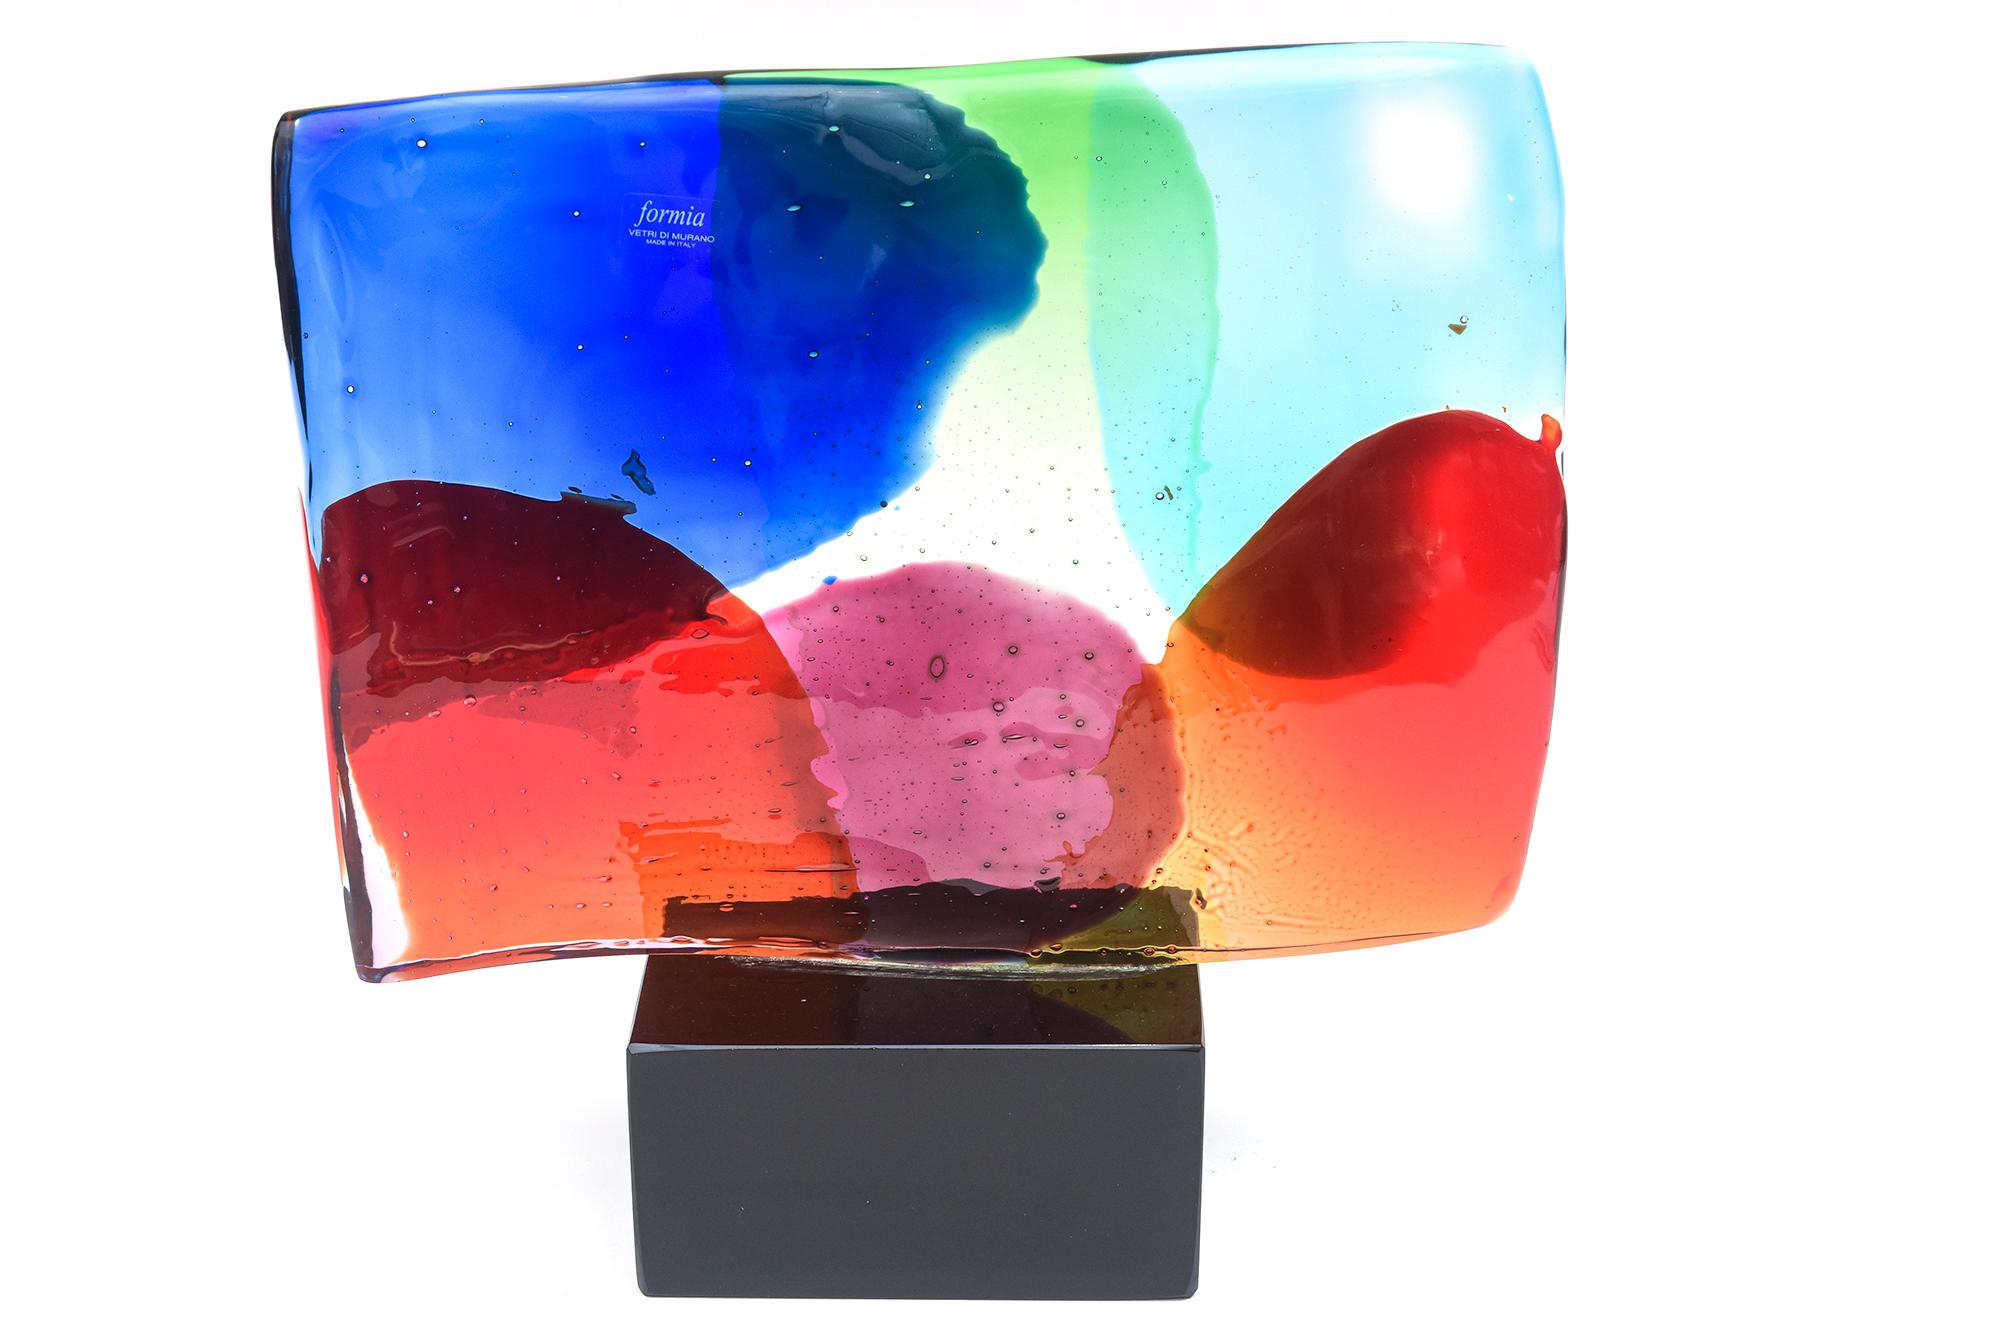 This fabulous vintage wave hand blown glass sculpture by Formia Murano was done in the 80s is like an abstract painting of luminous color patterns. It sits and is attached as was made to a black glass base. The colors range from blobs of red, sky